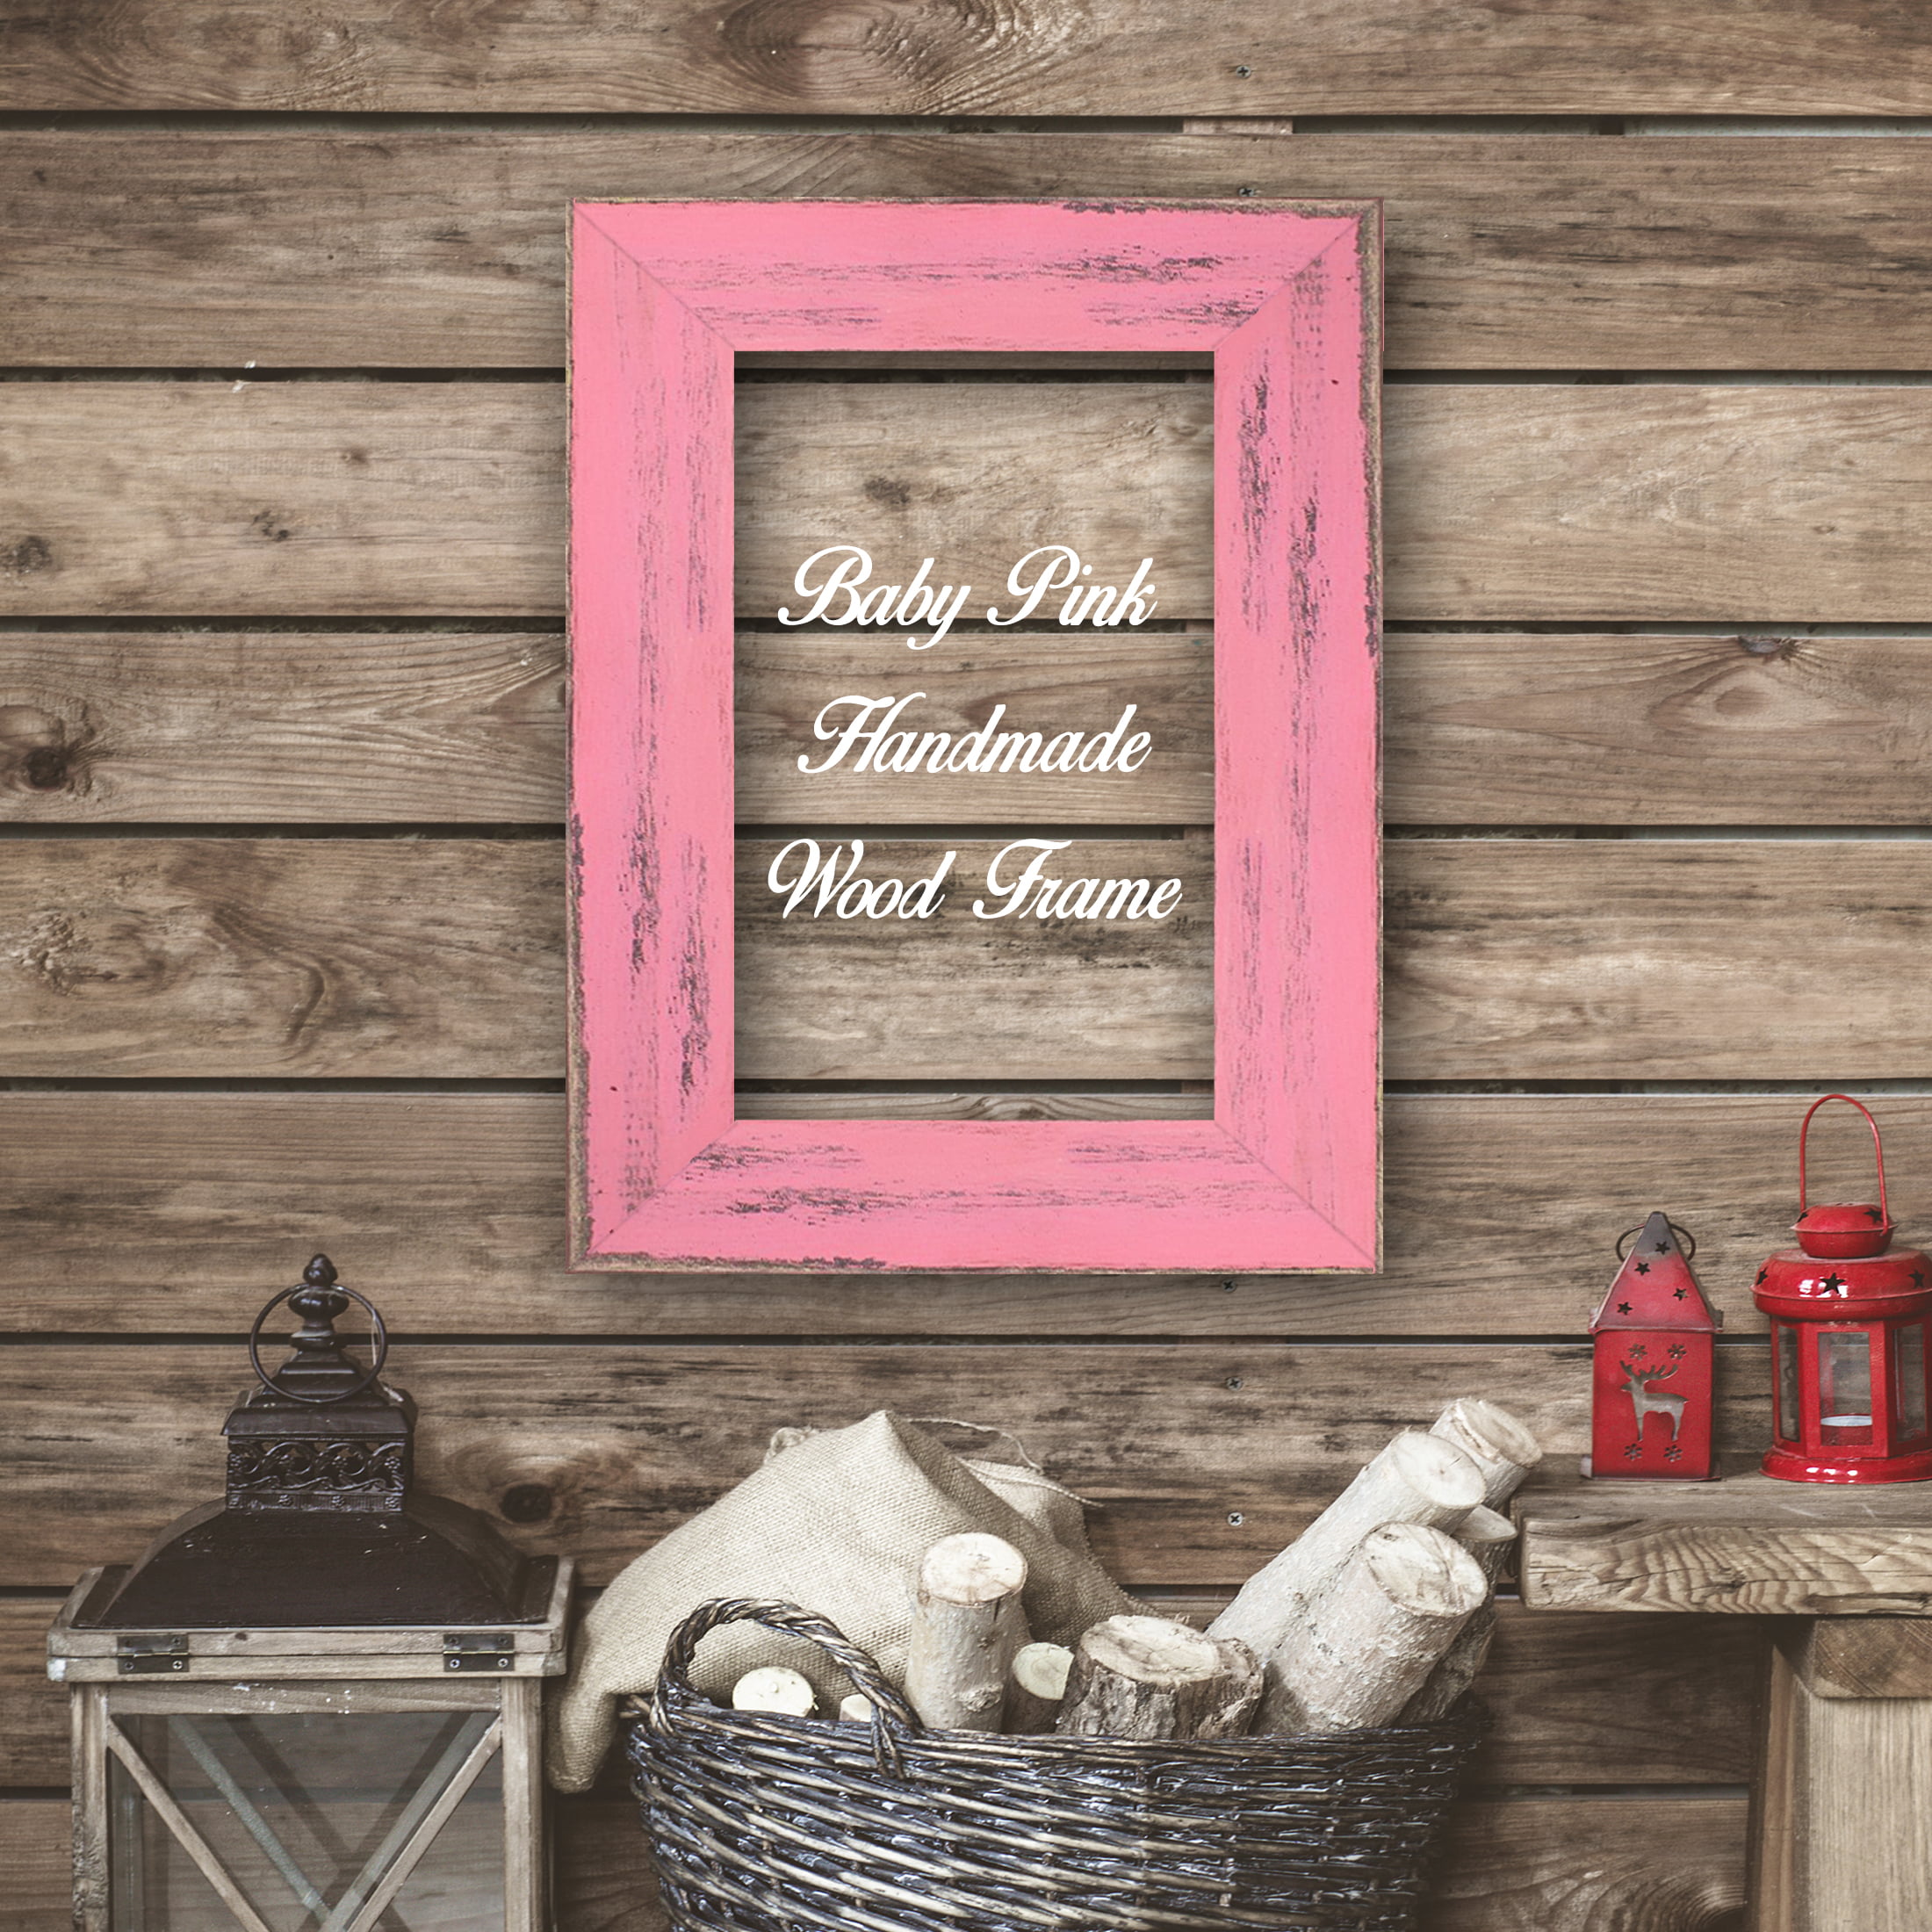 Wood Frame Photo Perfect for Picture Wedding Artwork Handmade Frame Art Cottage Beach Decor Baby Pink Wood Frame Poster